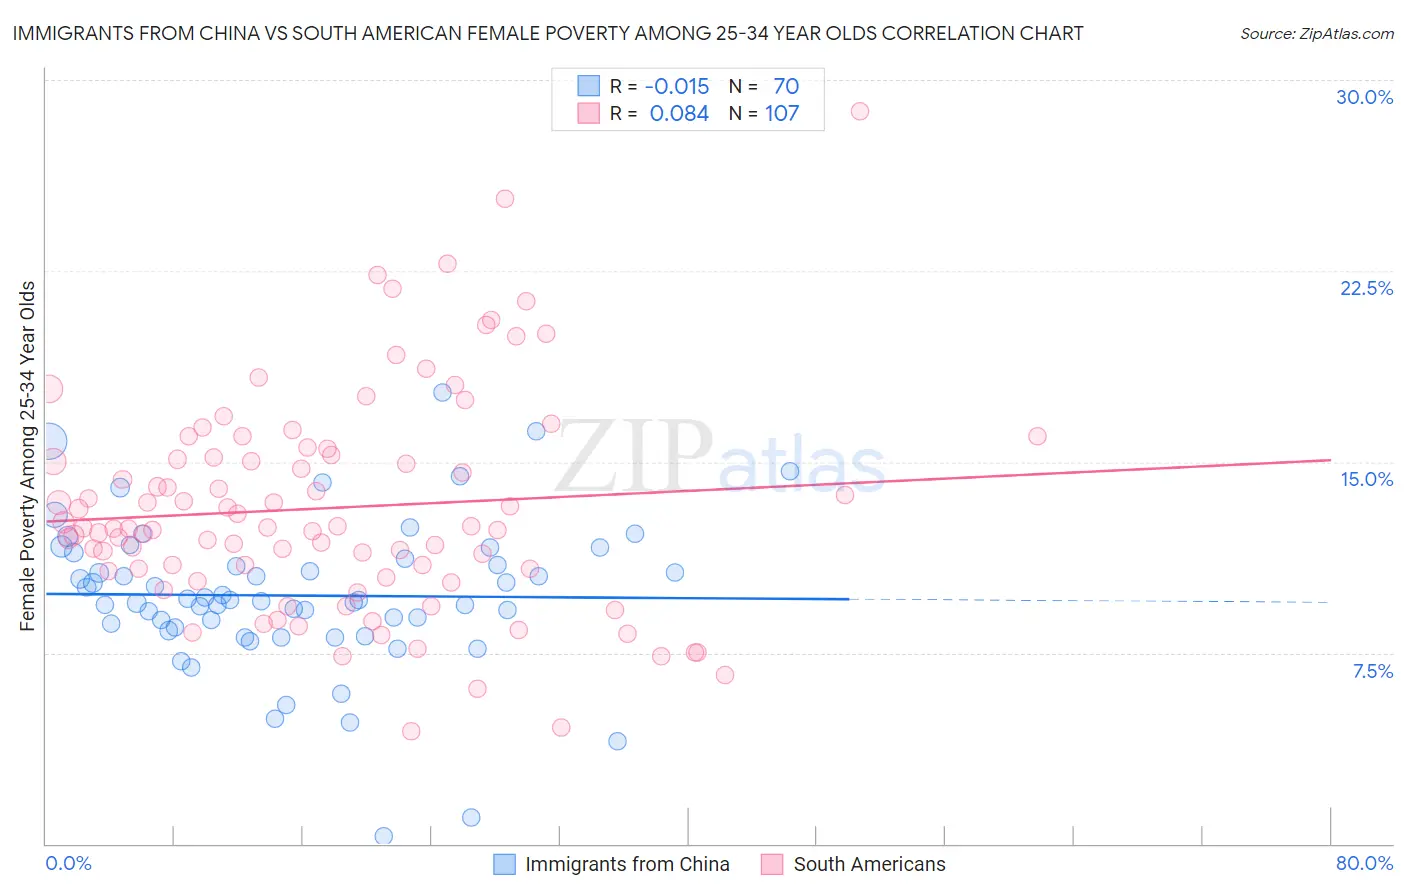 Immigrants from China vs South American Female Poverty Among 25-34 Year Olds